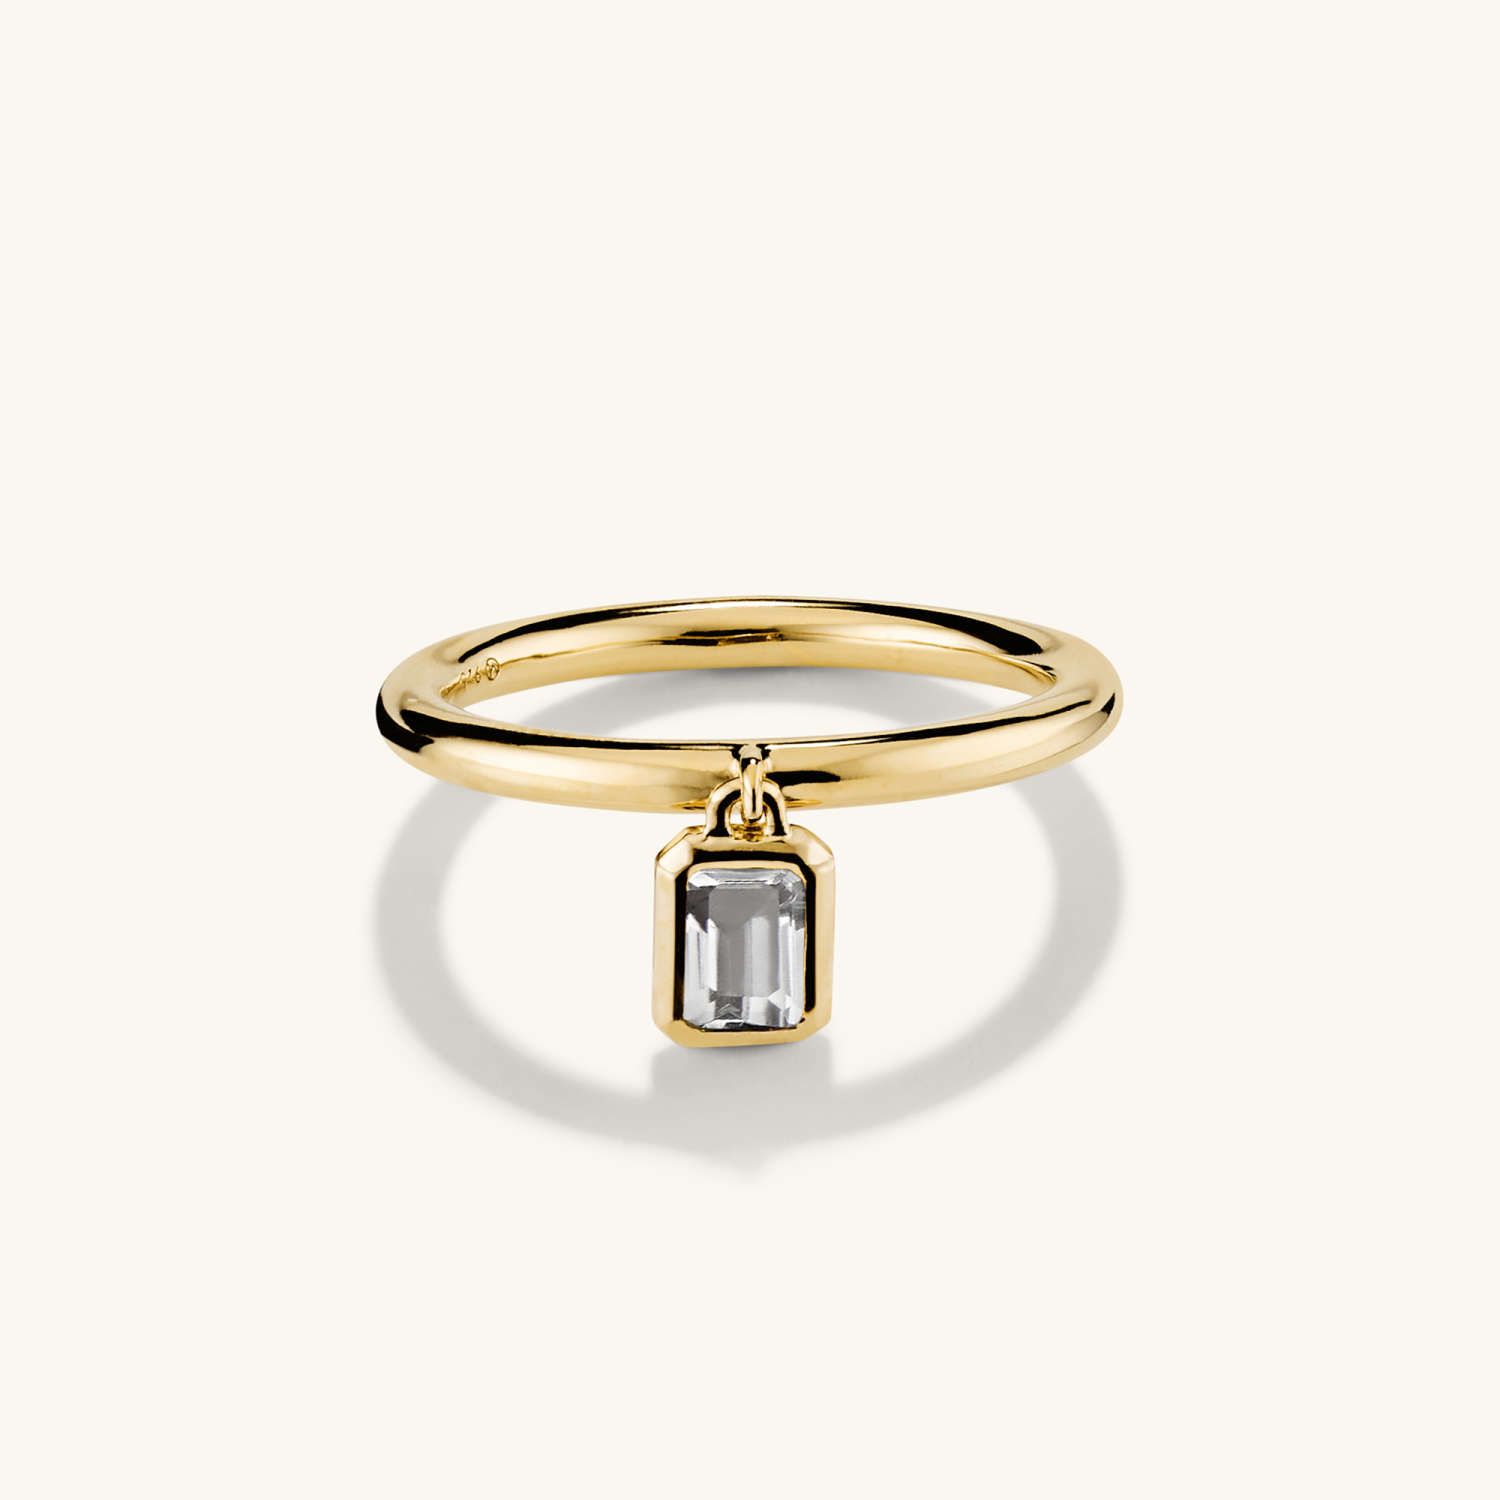 Gemstone Charm Stacker Ring : Handcrafted in Gold Vermeil | Mejuri | Mejuri (Global)